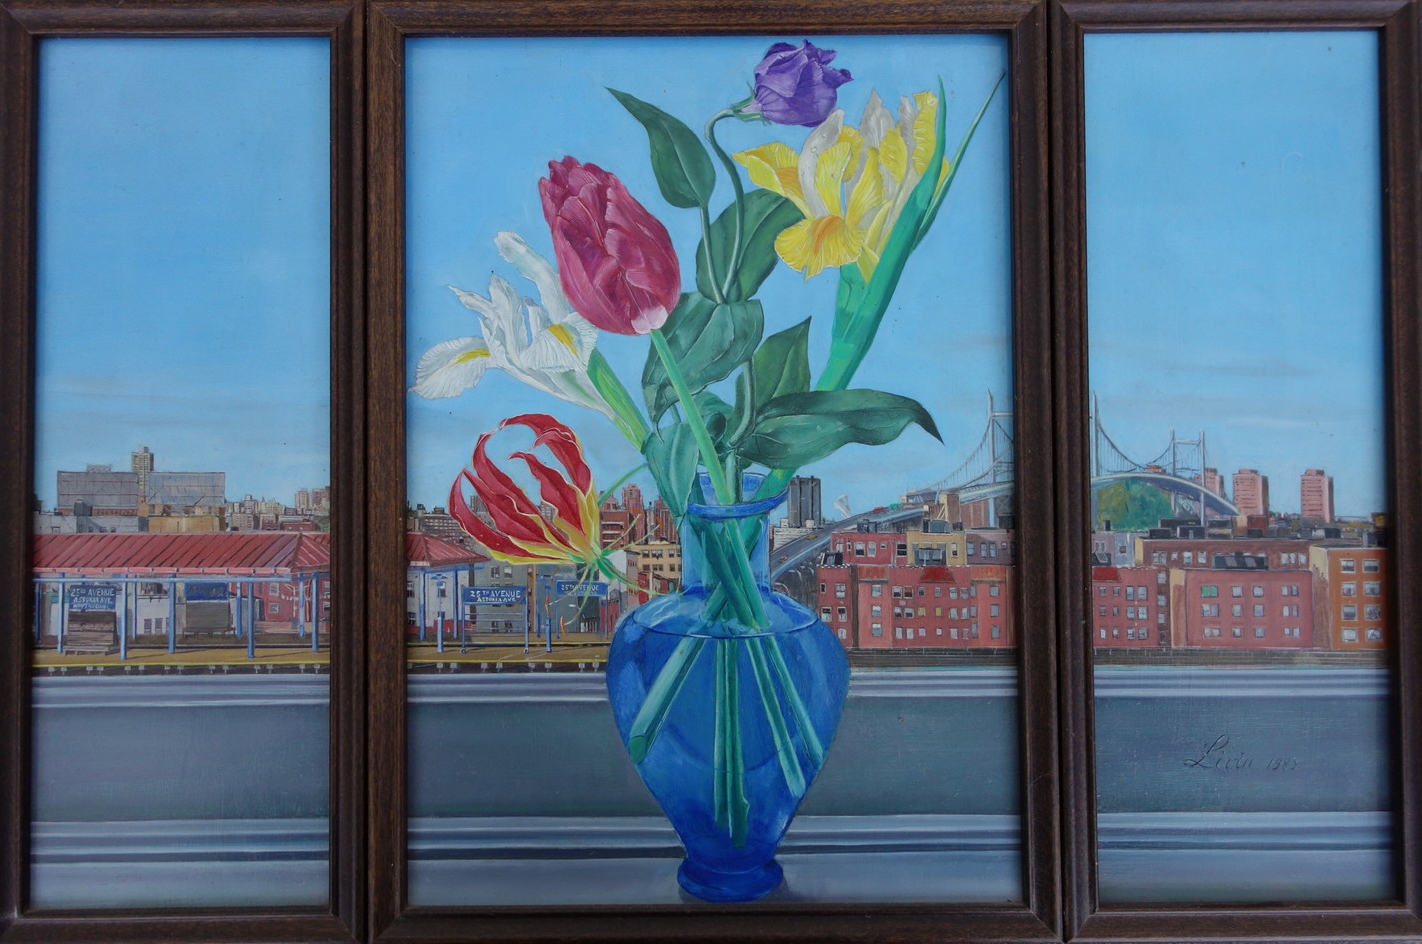   Triptych - Flowers on Window sill.&nbsp;&nbsp;View from my apartment in NY.&nbsp;&nbsp; At the Cloisters in NY there is at least one medieval triptych painting that I like, so this is my way of doing something along those lines.    1983    Oils on 